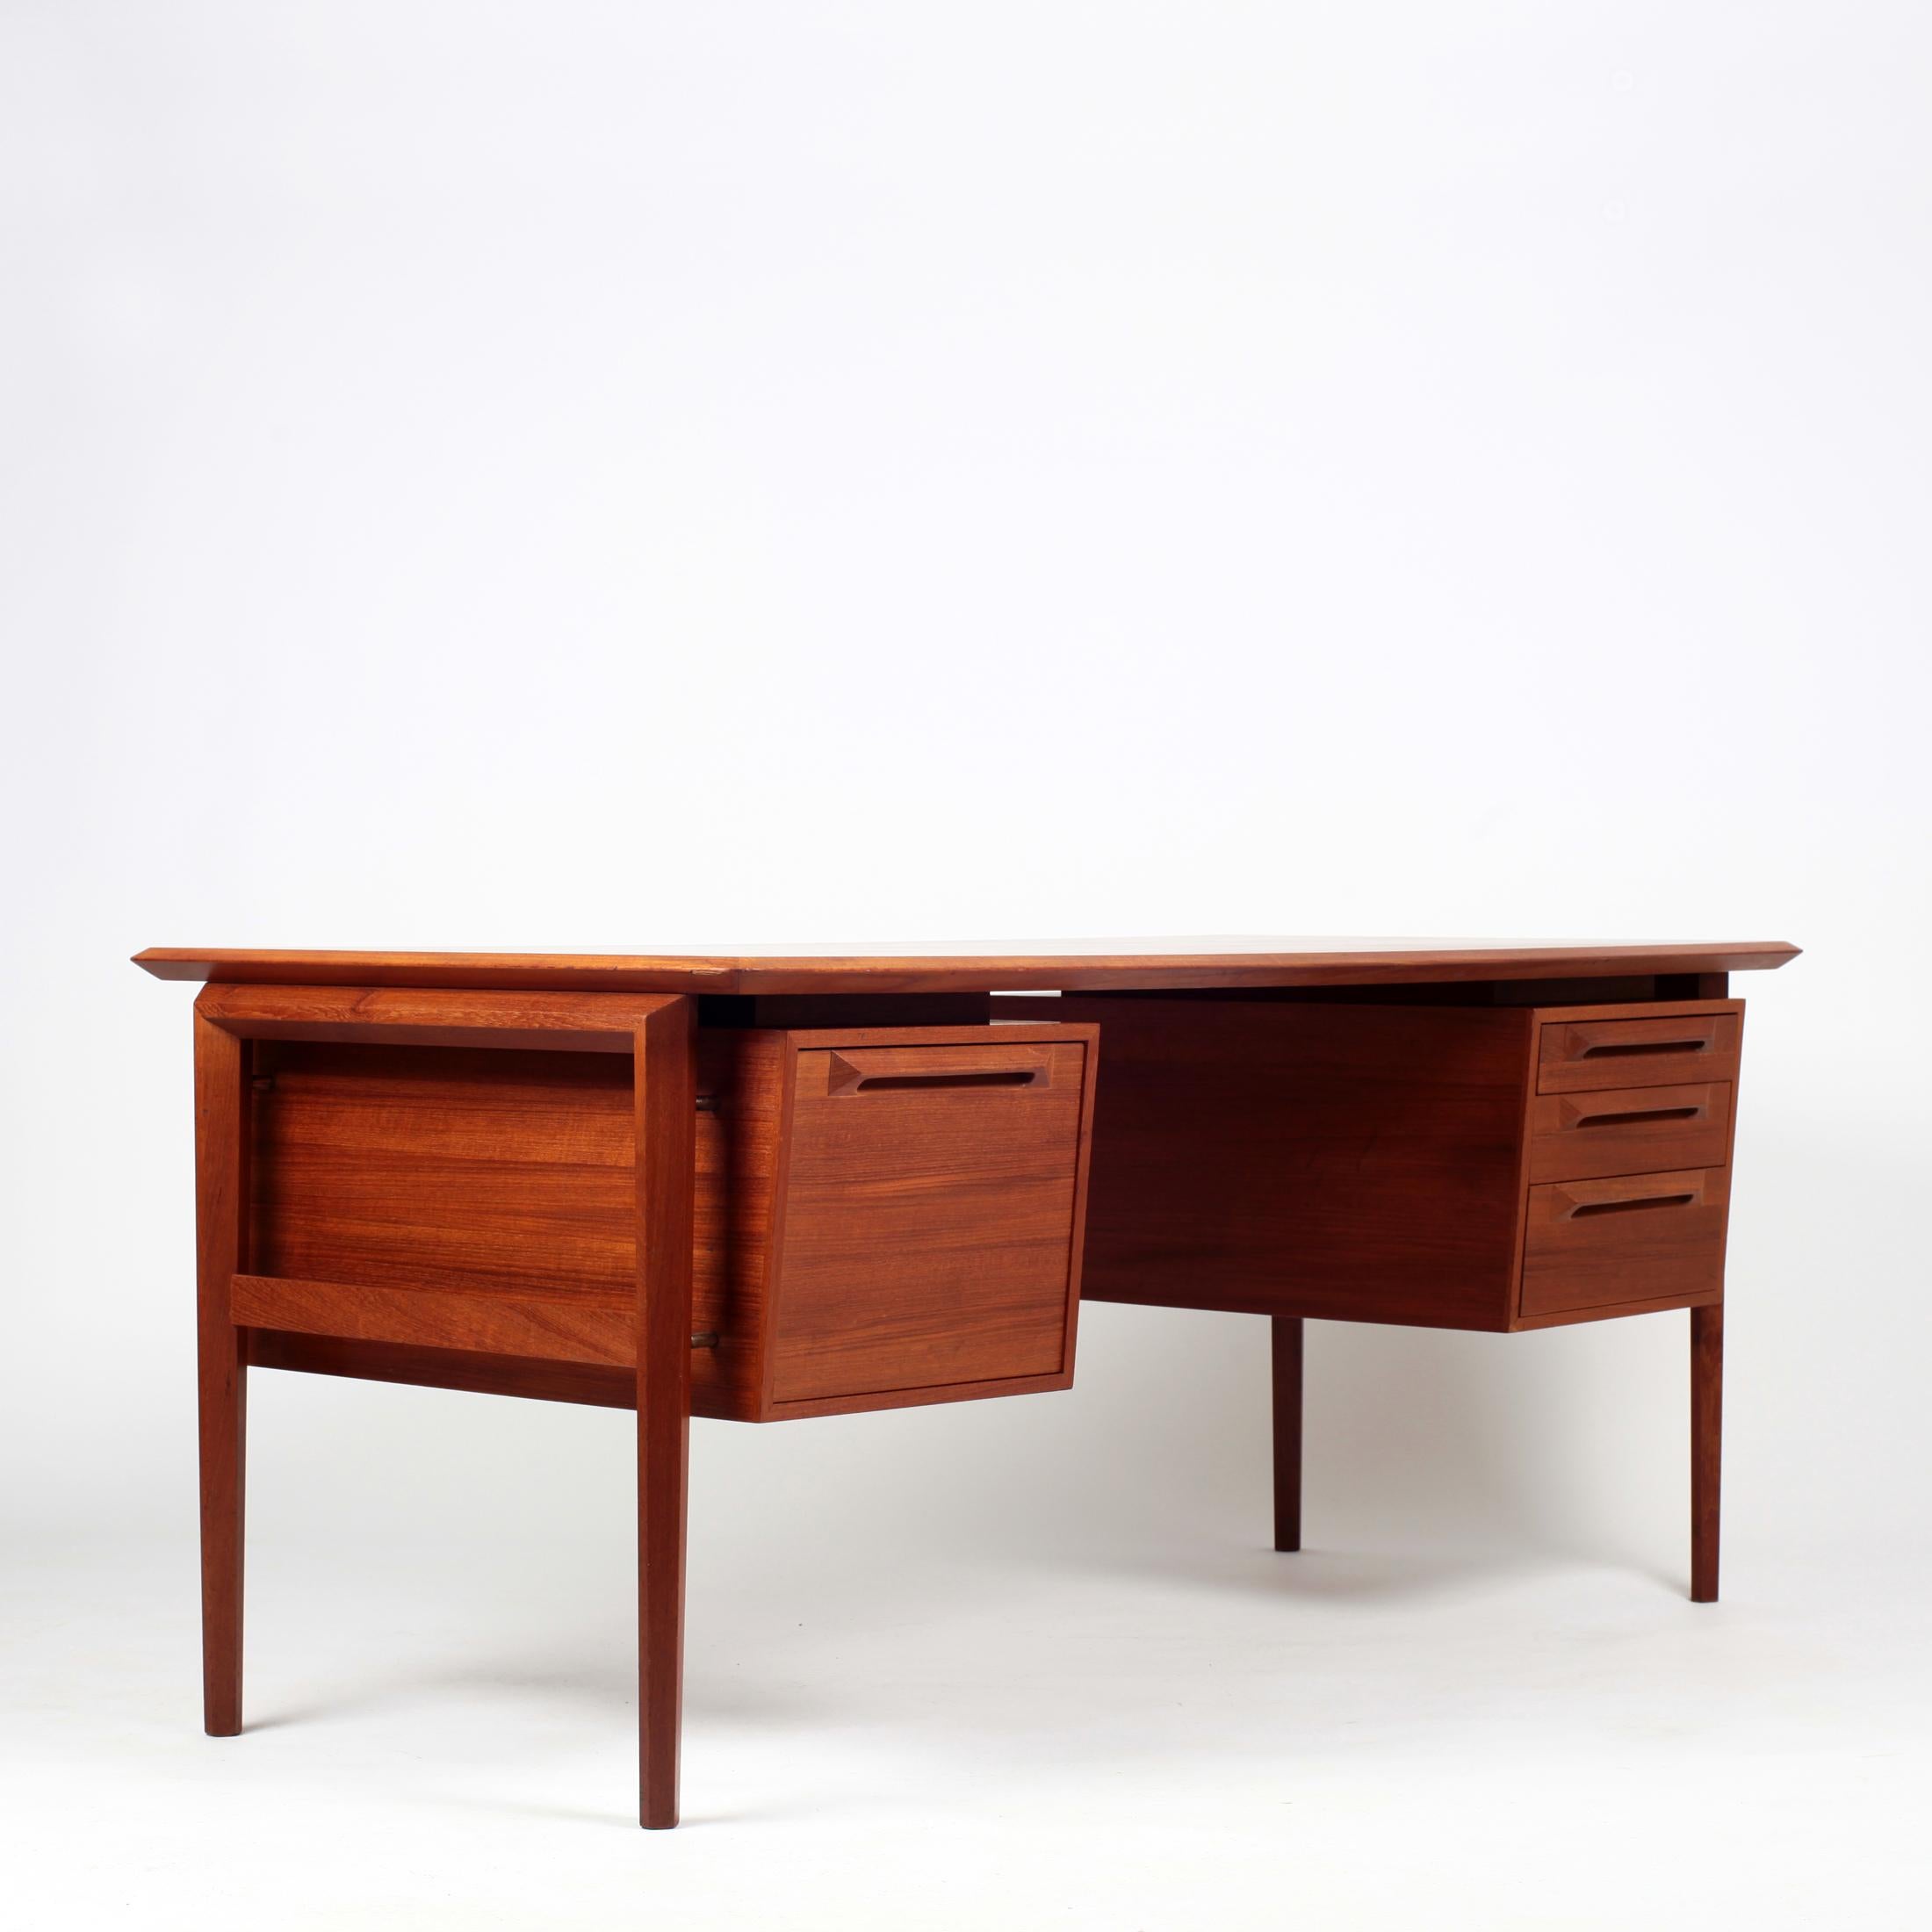 Large desk designed by Ib Kofod-Larsen (Denmark) for Seffle Møbelfabrik, Sweden, 1960s.
Teak with copper details.
Features three drawers on the right side and one file drawer on the left side
Original maker's stamp.
Very good condition, some